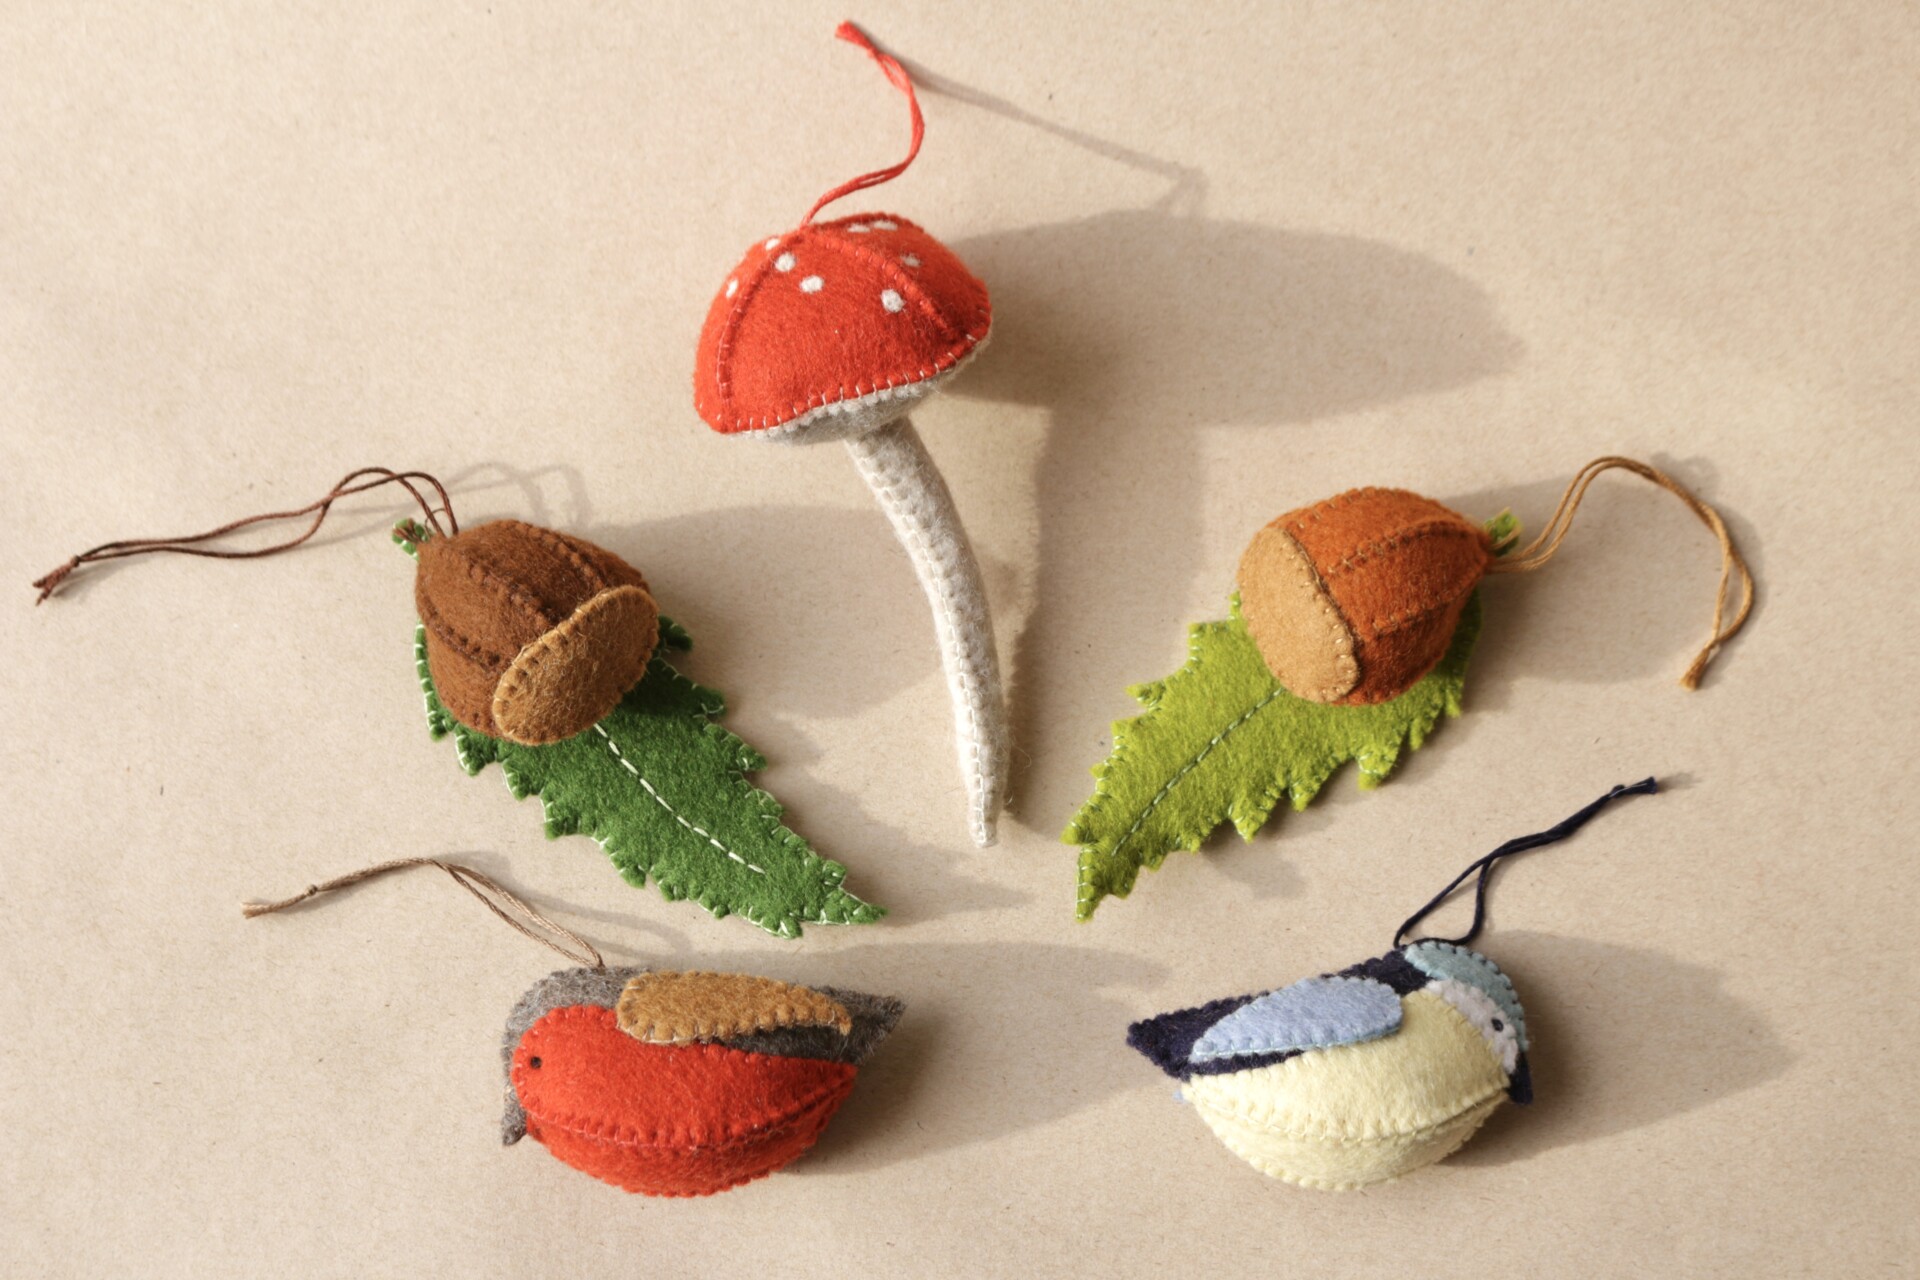 Decorations made from wool felt, a natural and durable material